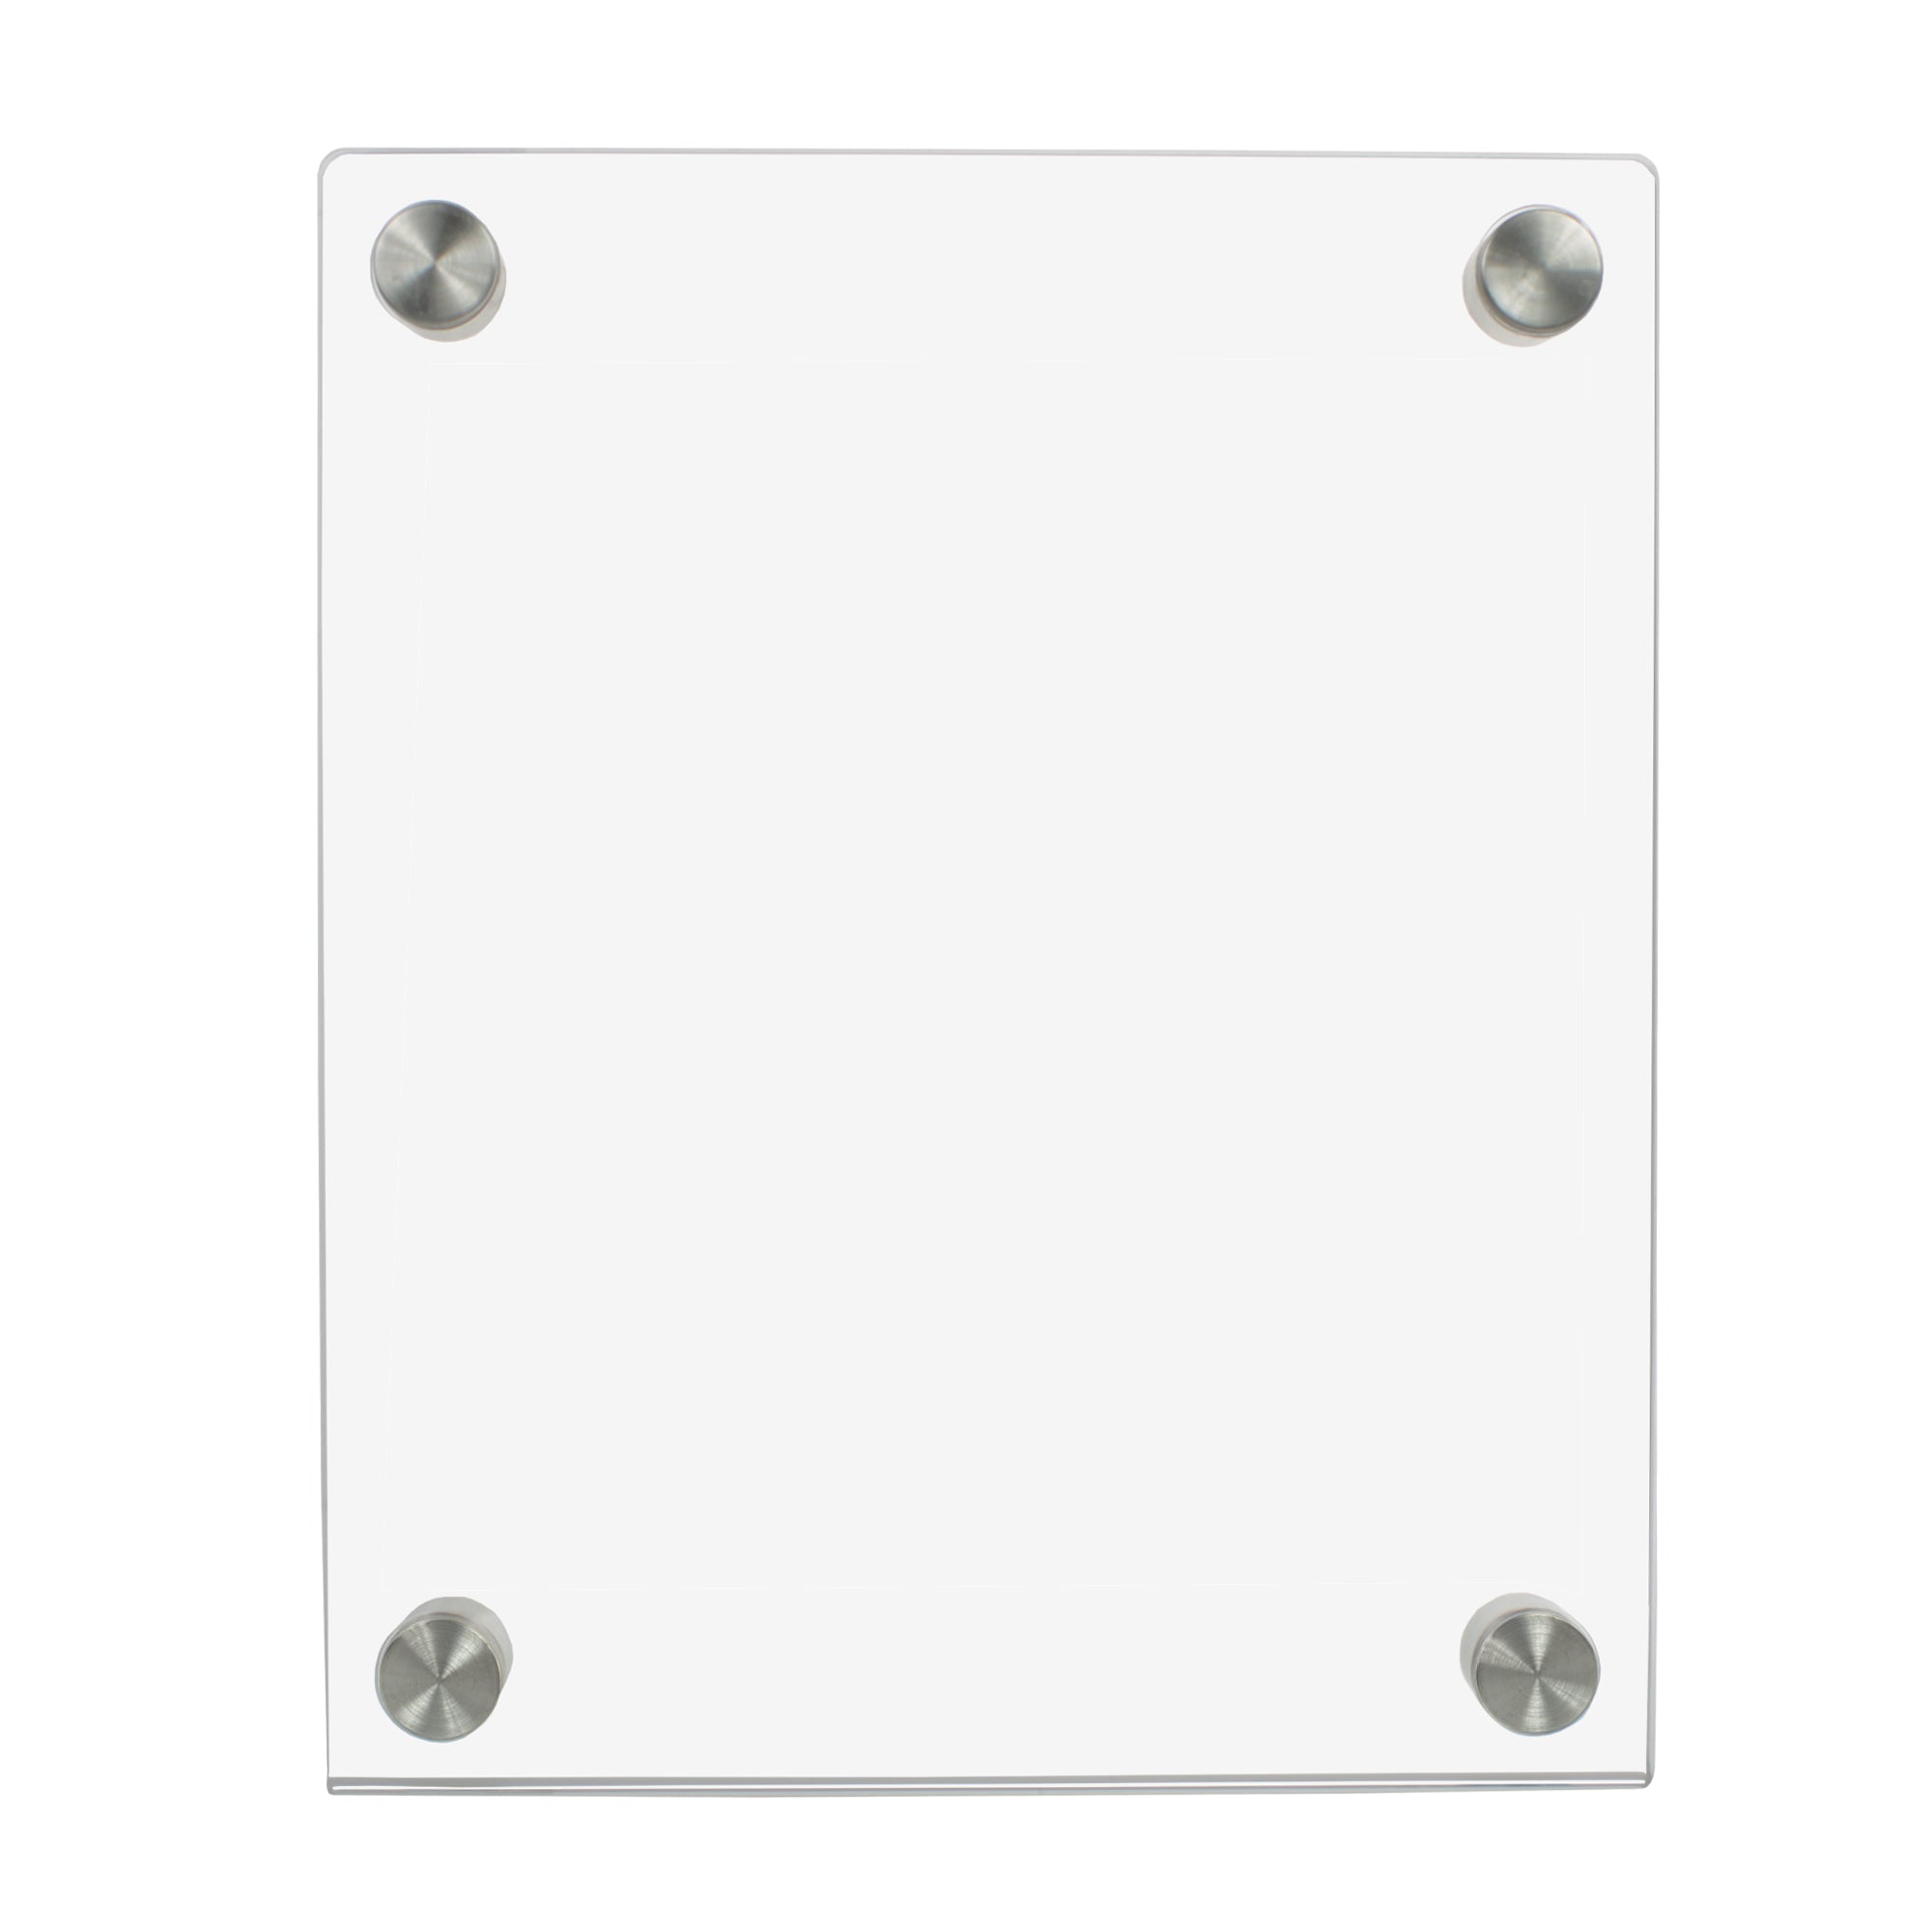 Acrylic Displays for Standoff Display Systems / Overstock Items